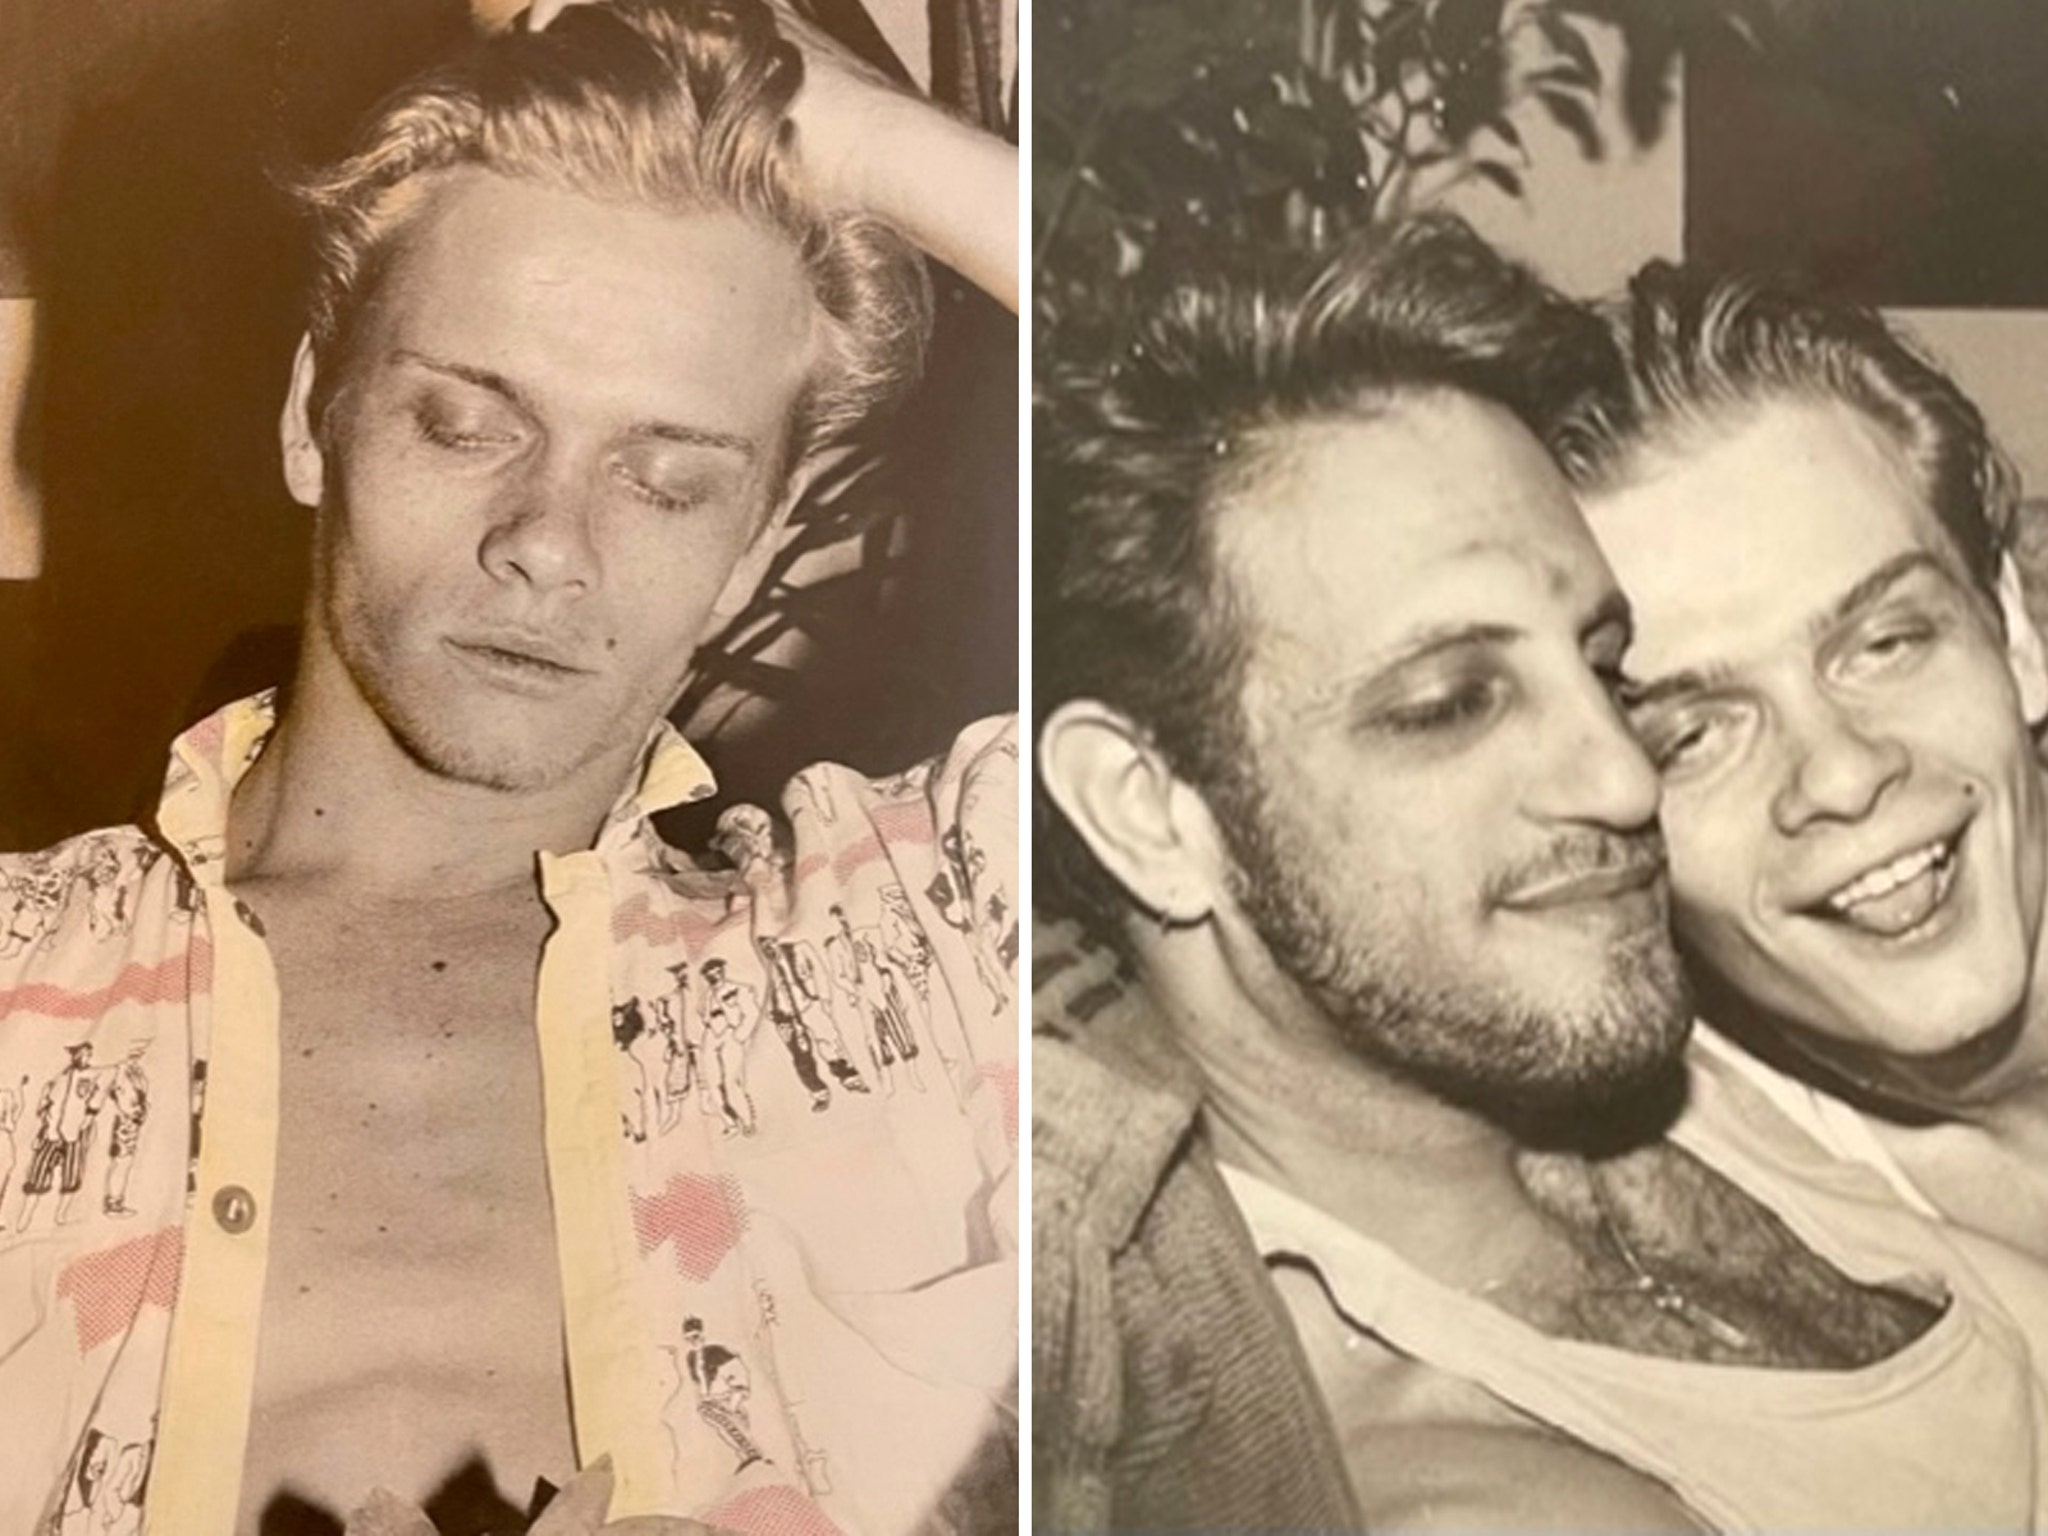 Gay Porn Star Billy Newtons Brutal Murder Solved Thanks to Amateur Sleuths 32 Years Later image image pic